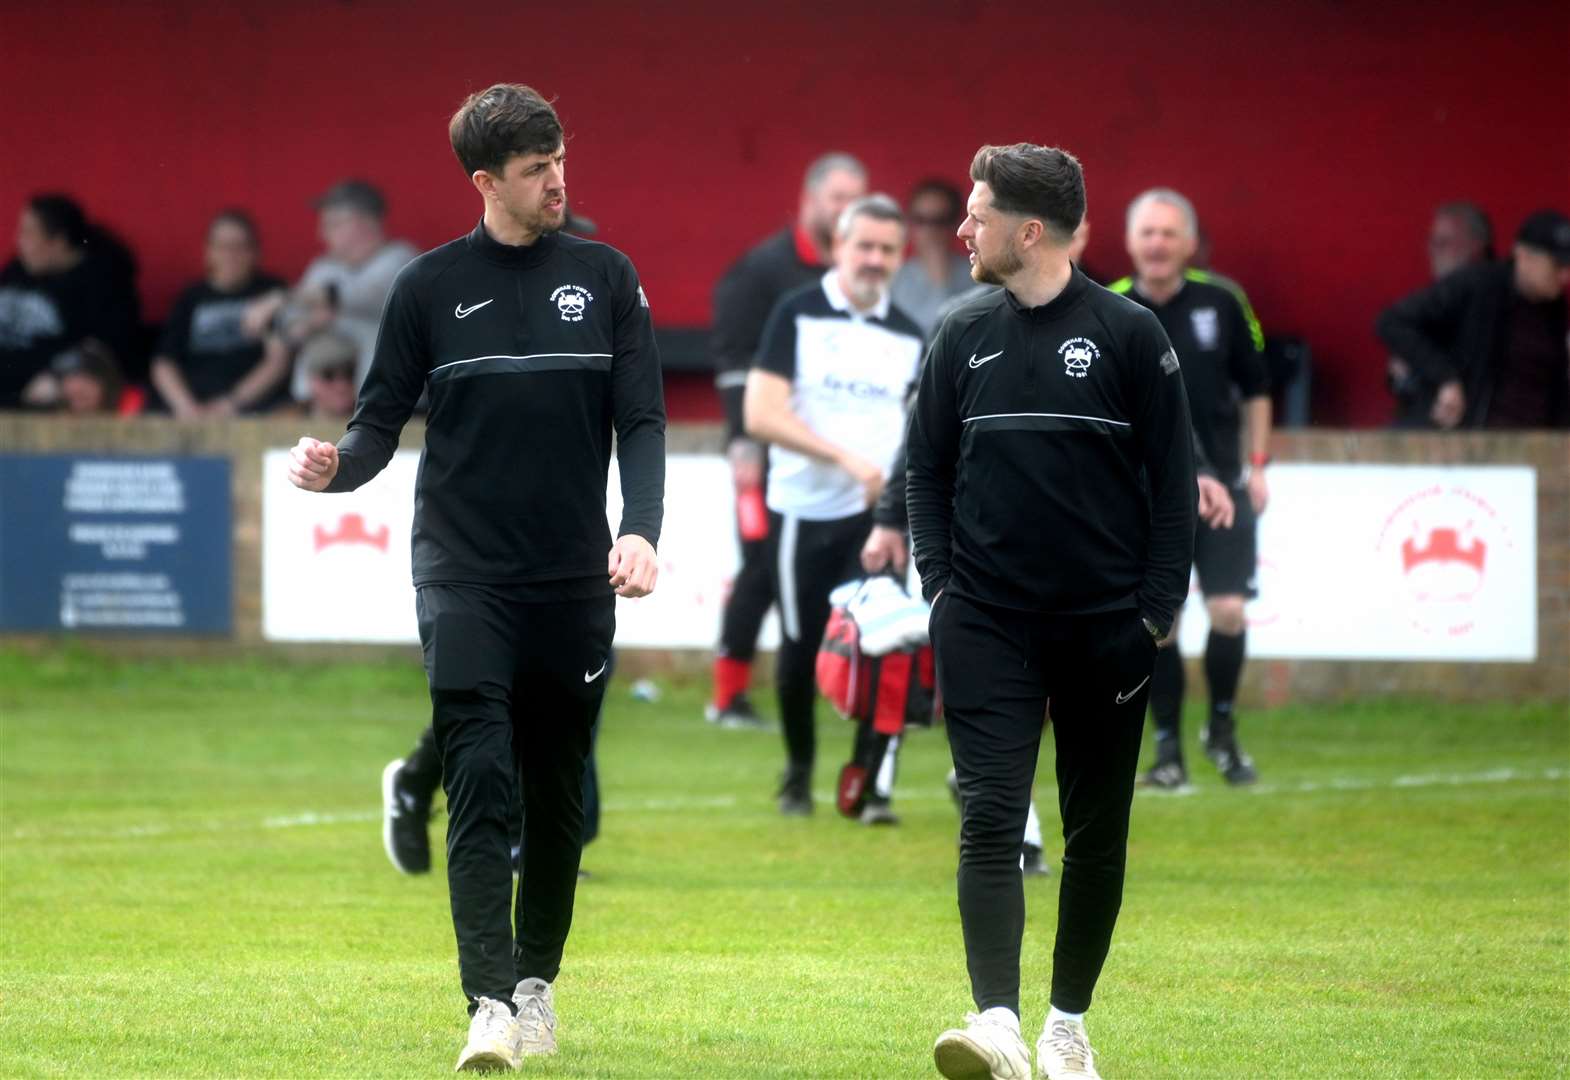 Joint Downham Town managers Craig Dickson and Dale Stokes have seen their side win six of their seven games in the Thurlow Nunn Premier Division after Saturday's 4-2 victory at Woodbridge Town.